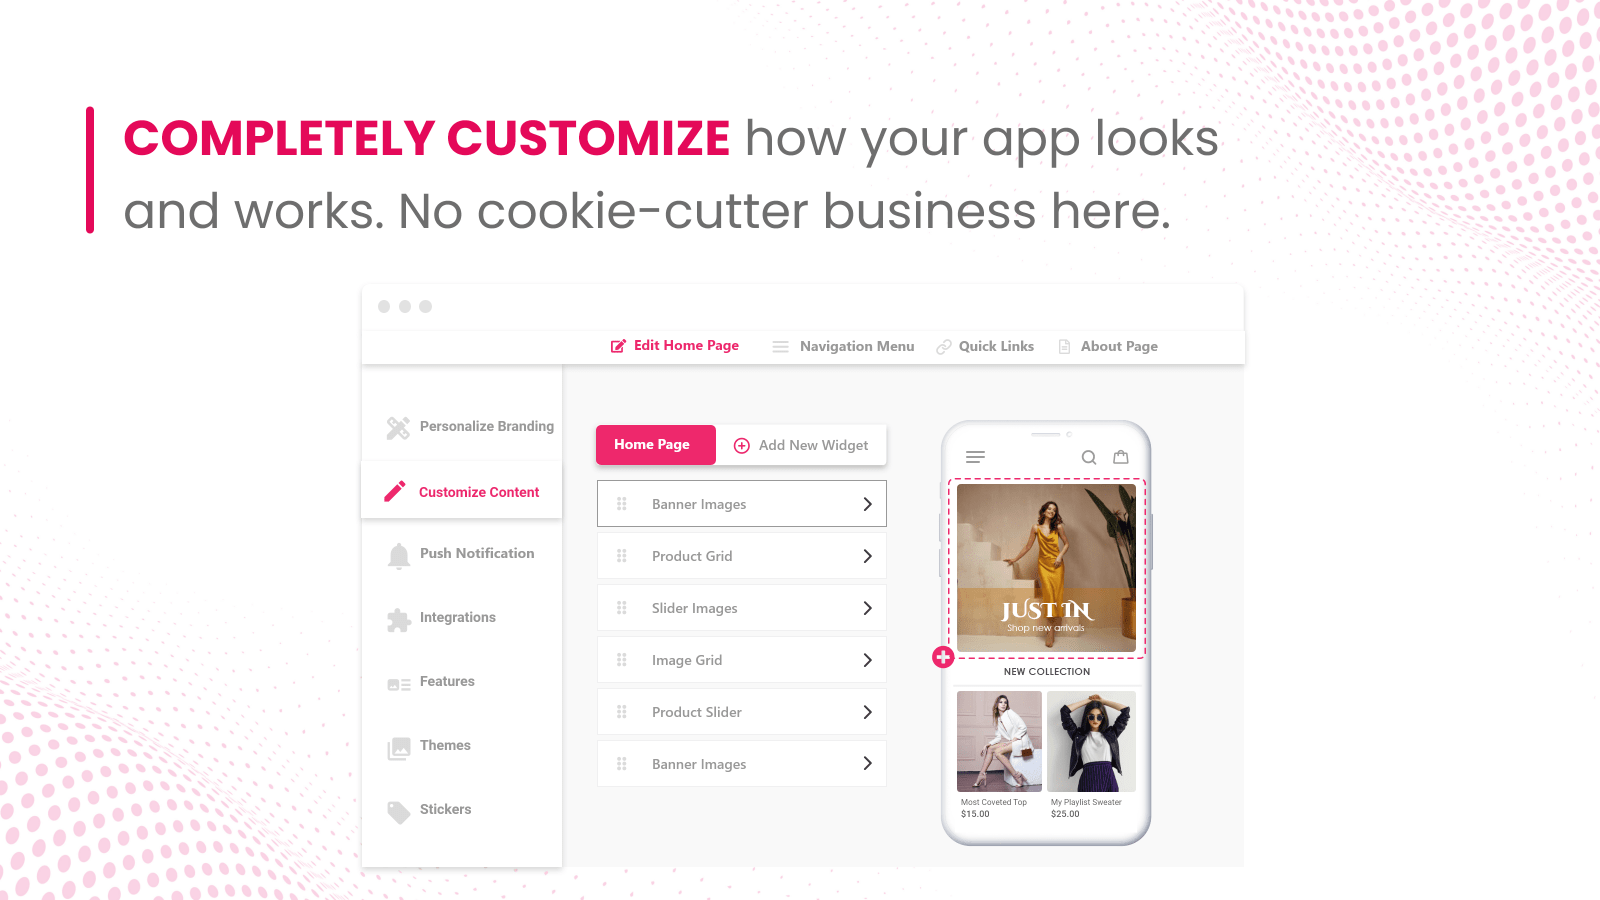 Customize your app exactly how you want it.